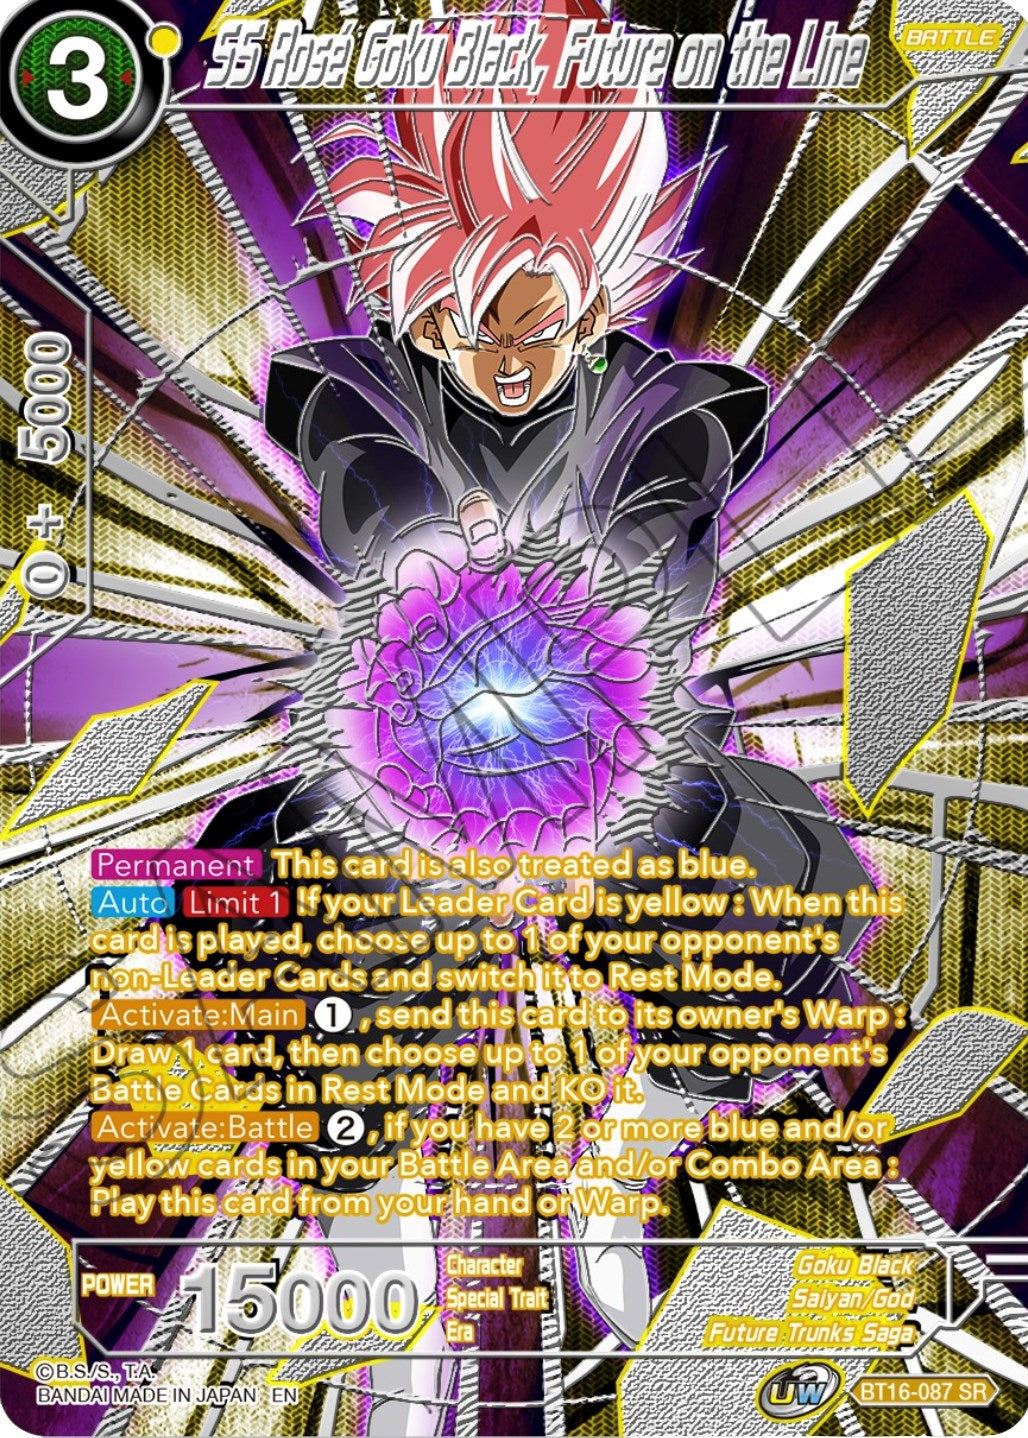 SS Rose Goku Black, Future on the Line (BT16-087) [Collector's Selection Vol. 3] | Total Play